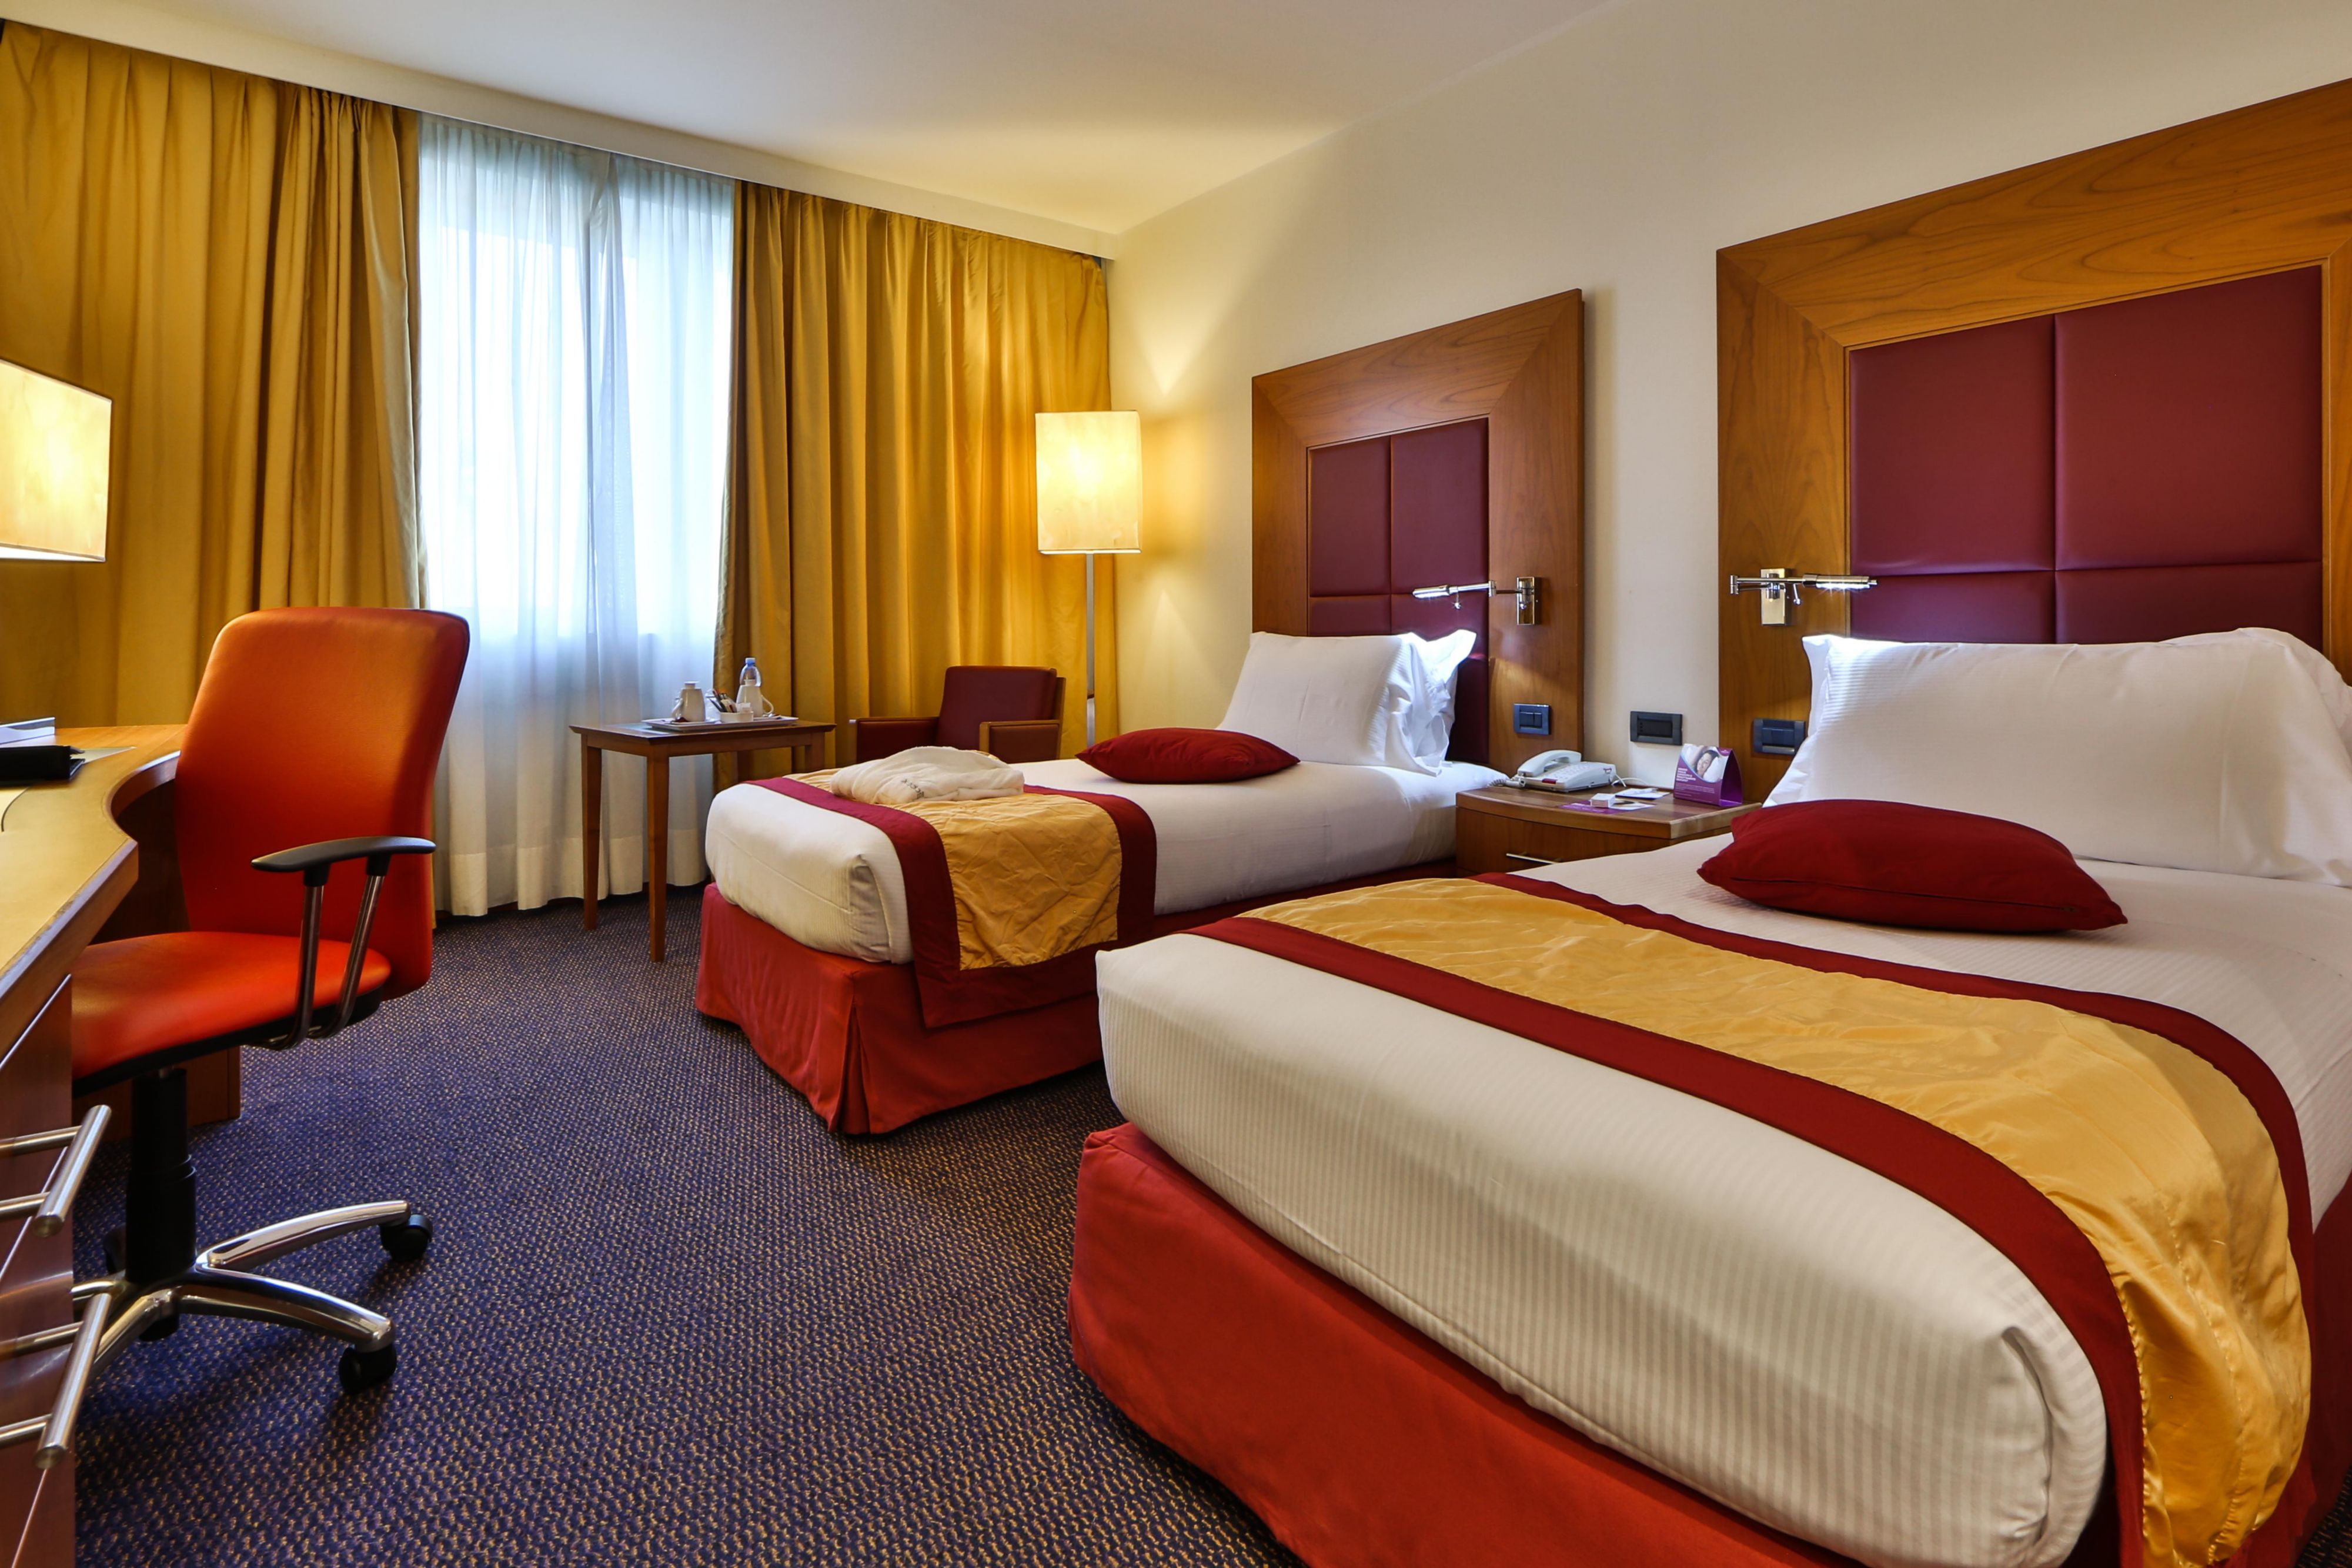 For your stay, choose our twin beds room